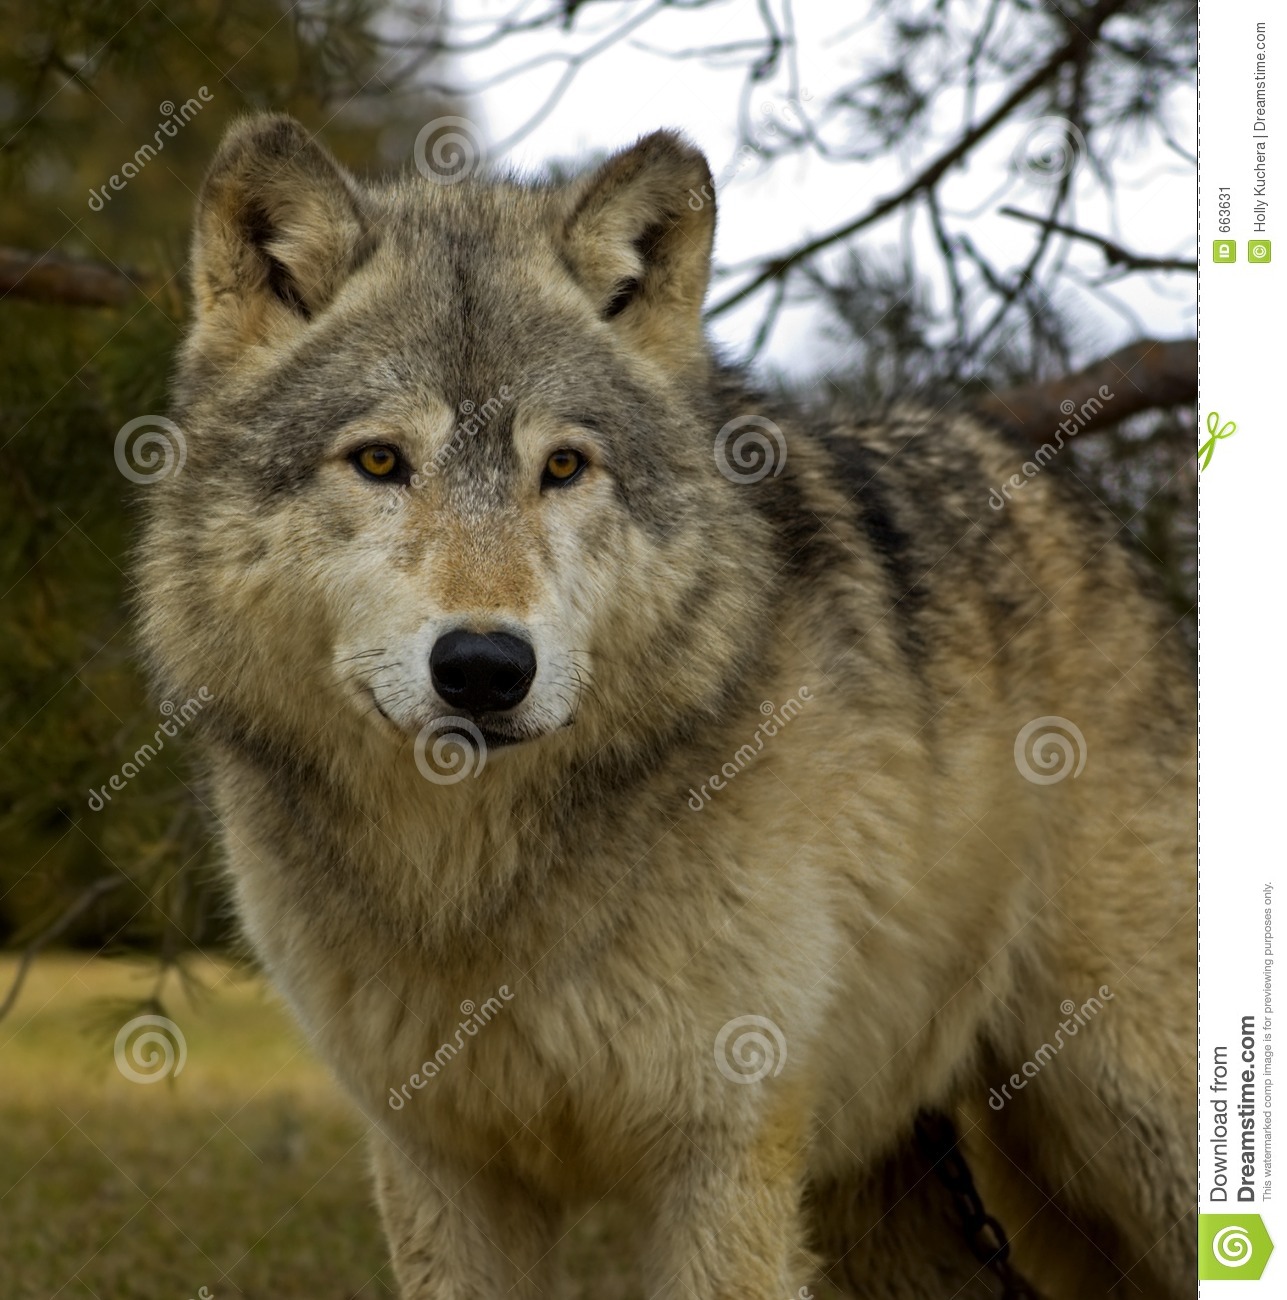 Timber Wolf  Canis Lupus    Square Stock Image   Image  663631